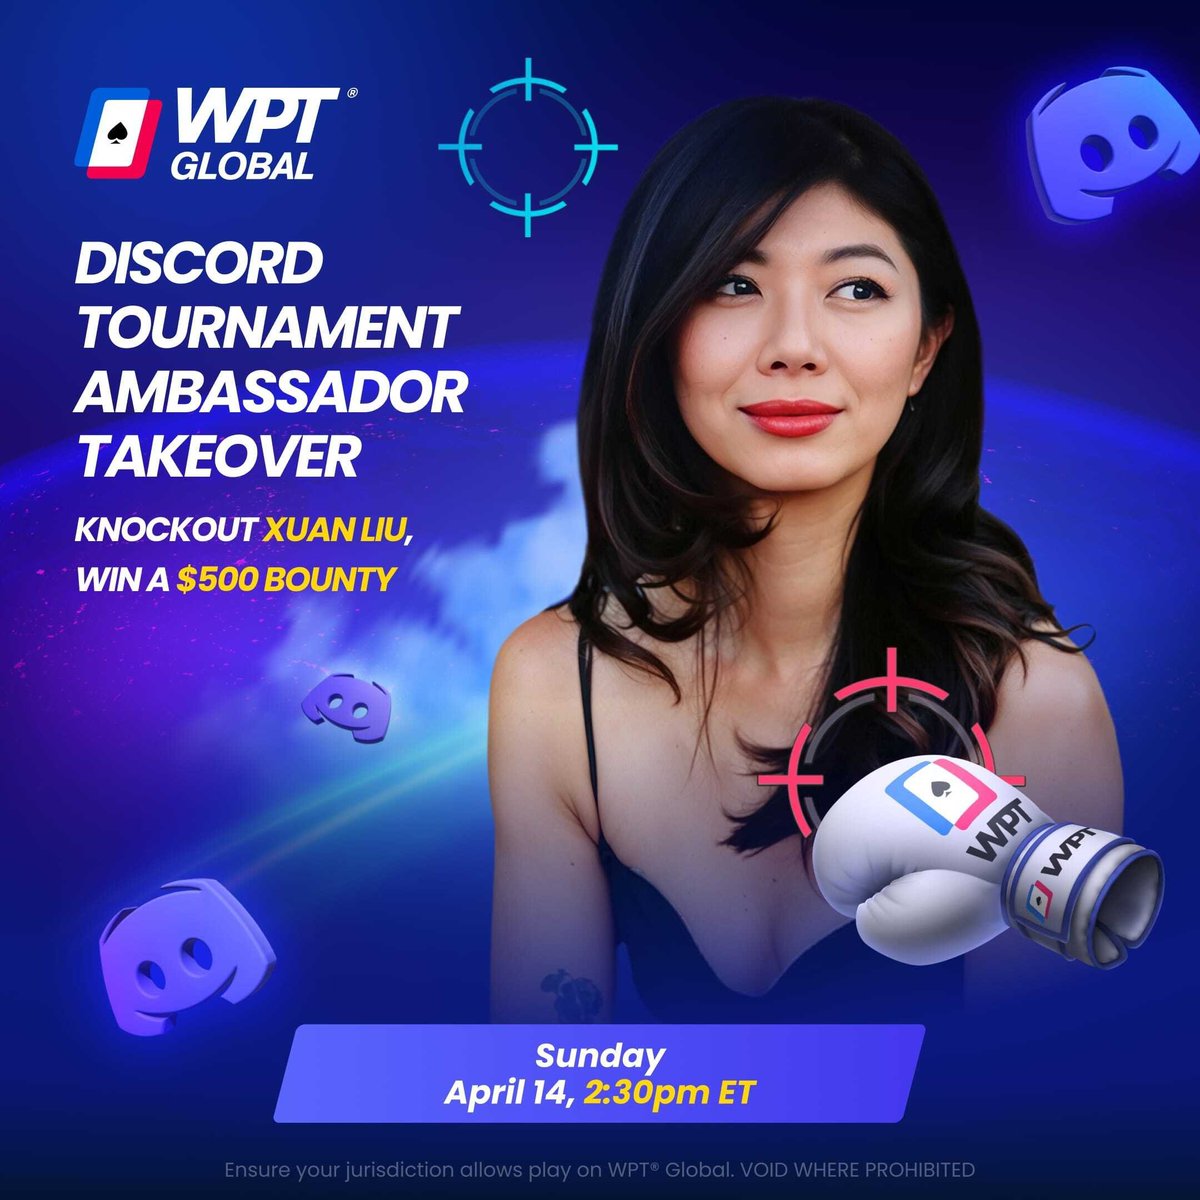 It's another thrilling Super Sunday over at @wpt_global 💥 We continue to allocate 100% of every buy-in straight to the MTT prize pool until April 28th. That's right, no rake! And don't forget, it's week three of April's Discord Tournament Ambassador Takeover, featuring a $500…